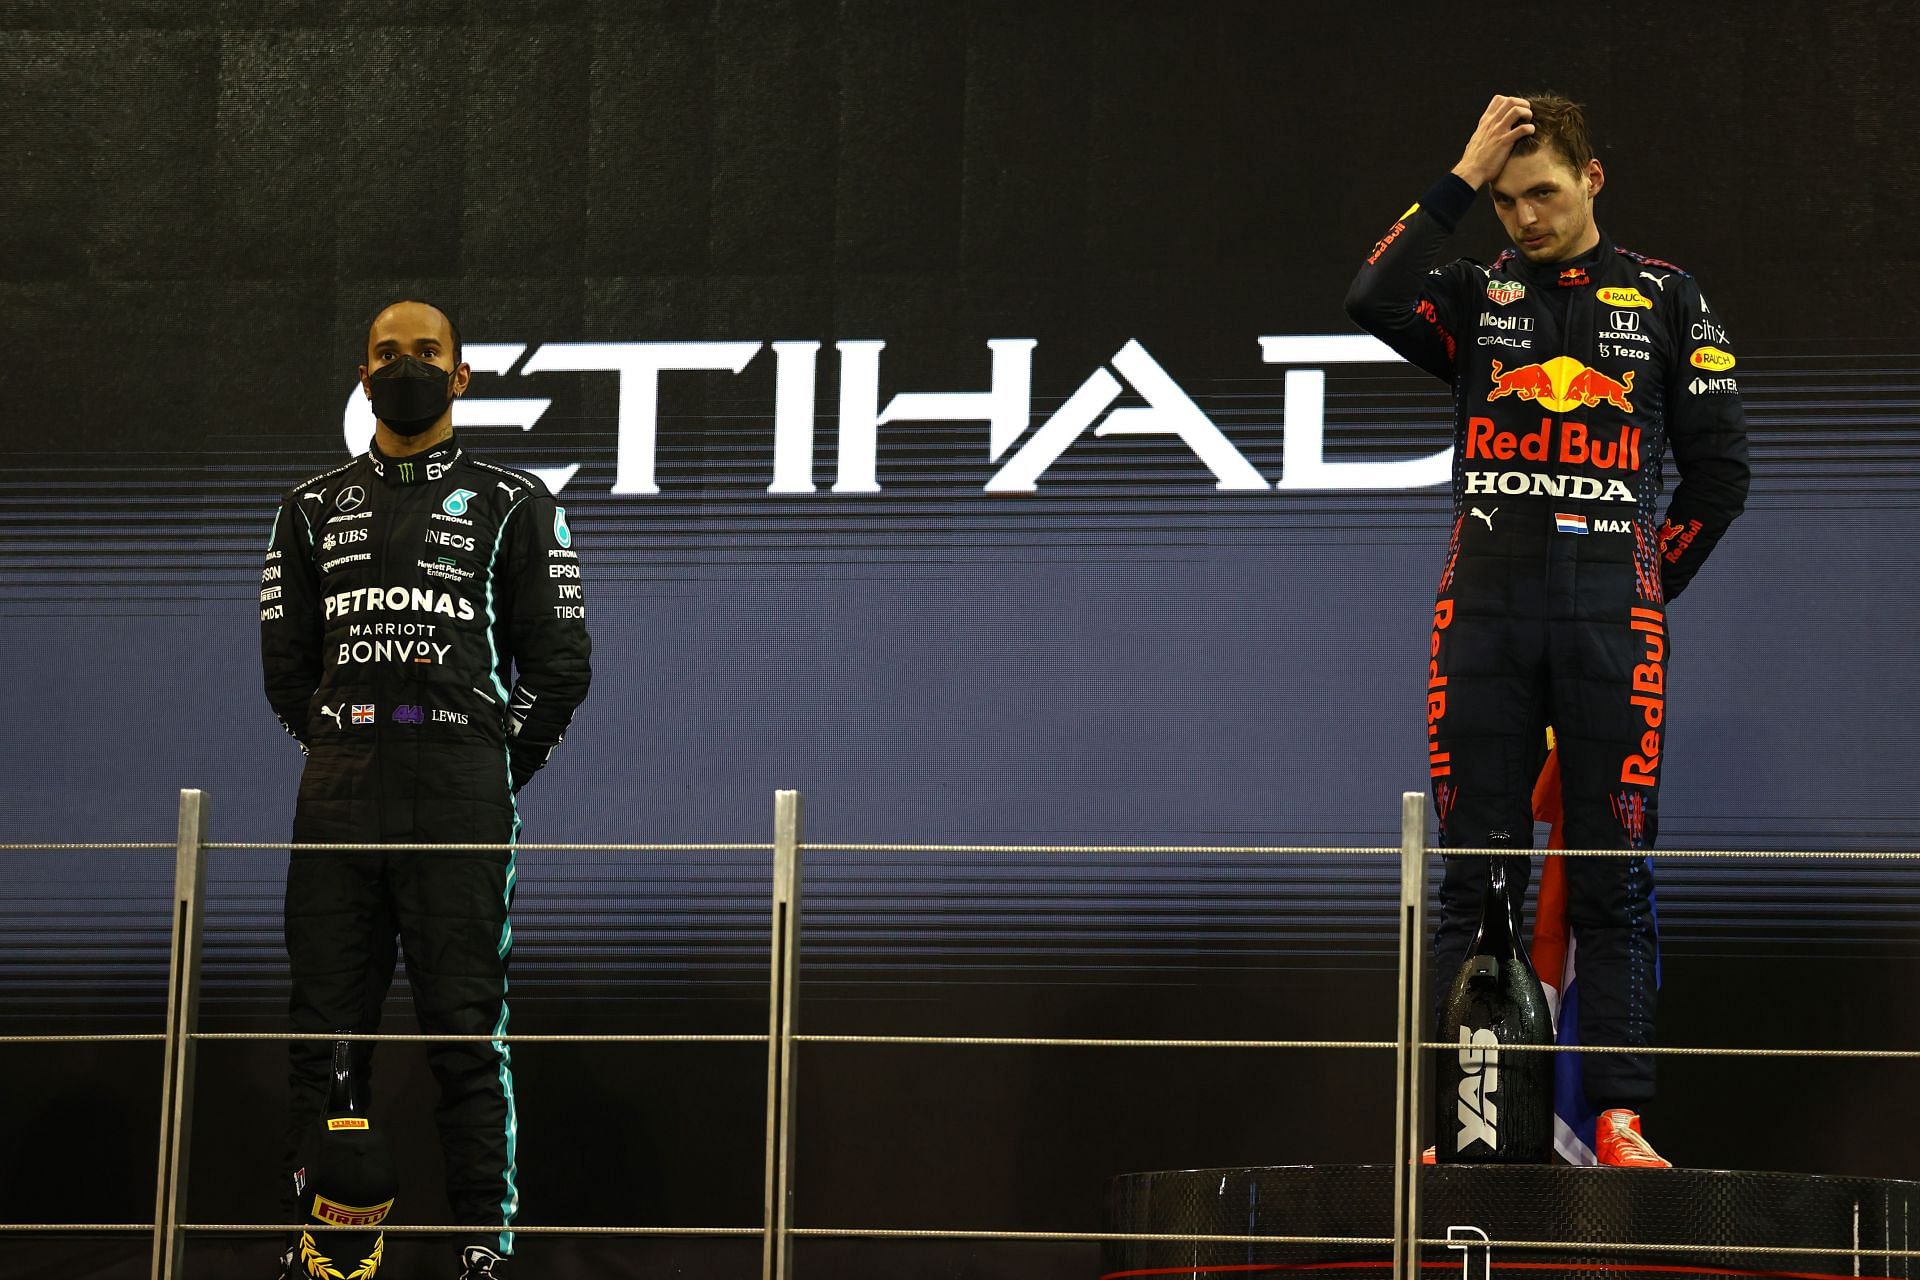 F1 Grand Prix of Abu Dhabi - Lewis Hamilton and Max Verstappen share a podium for the final time in 2021.